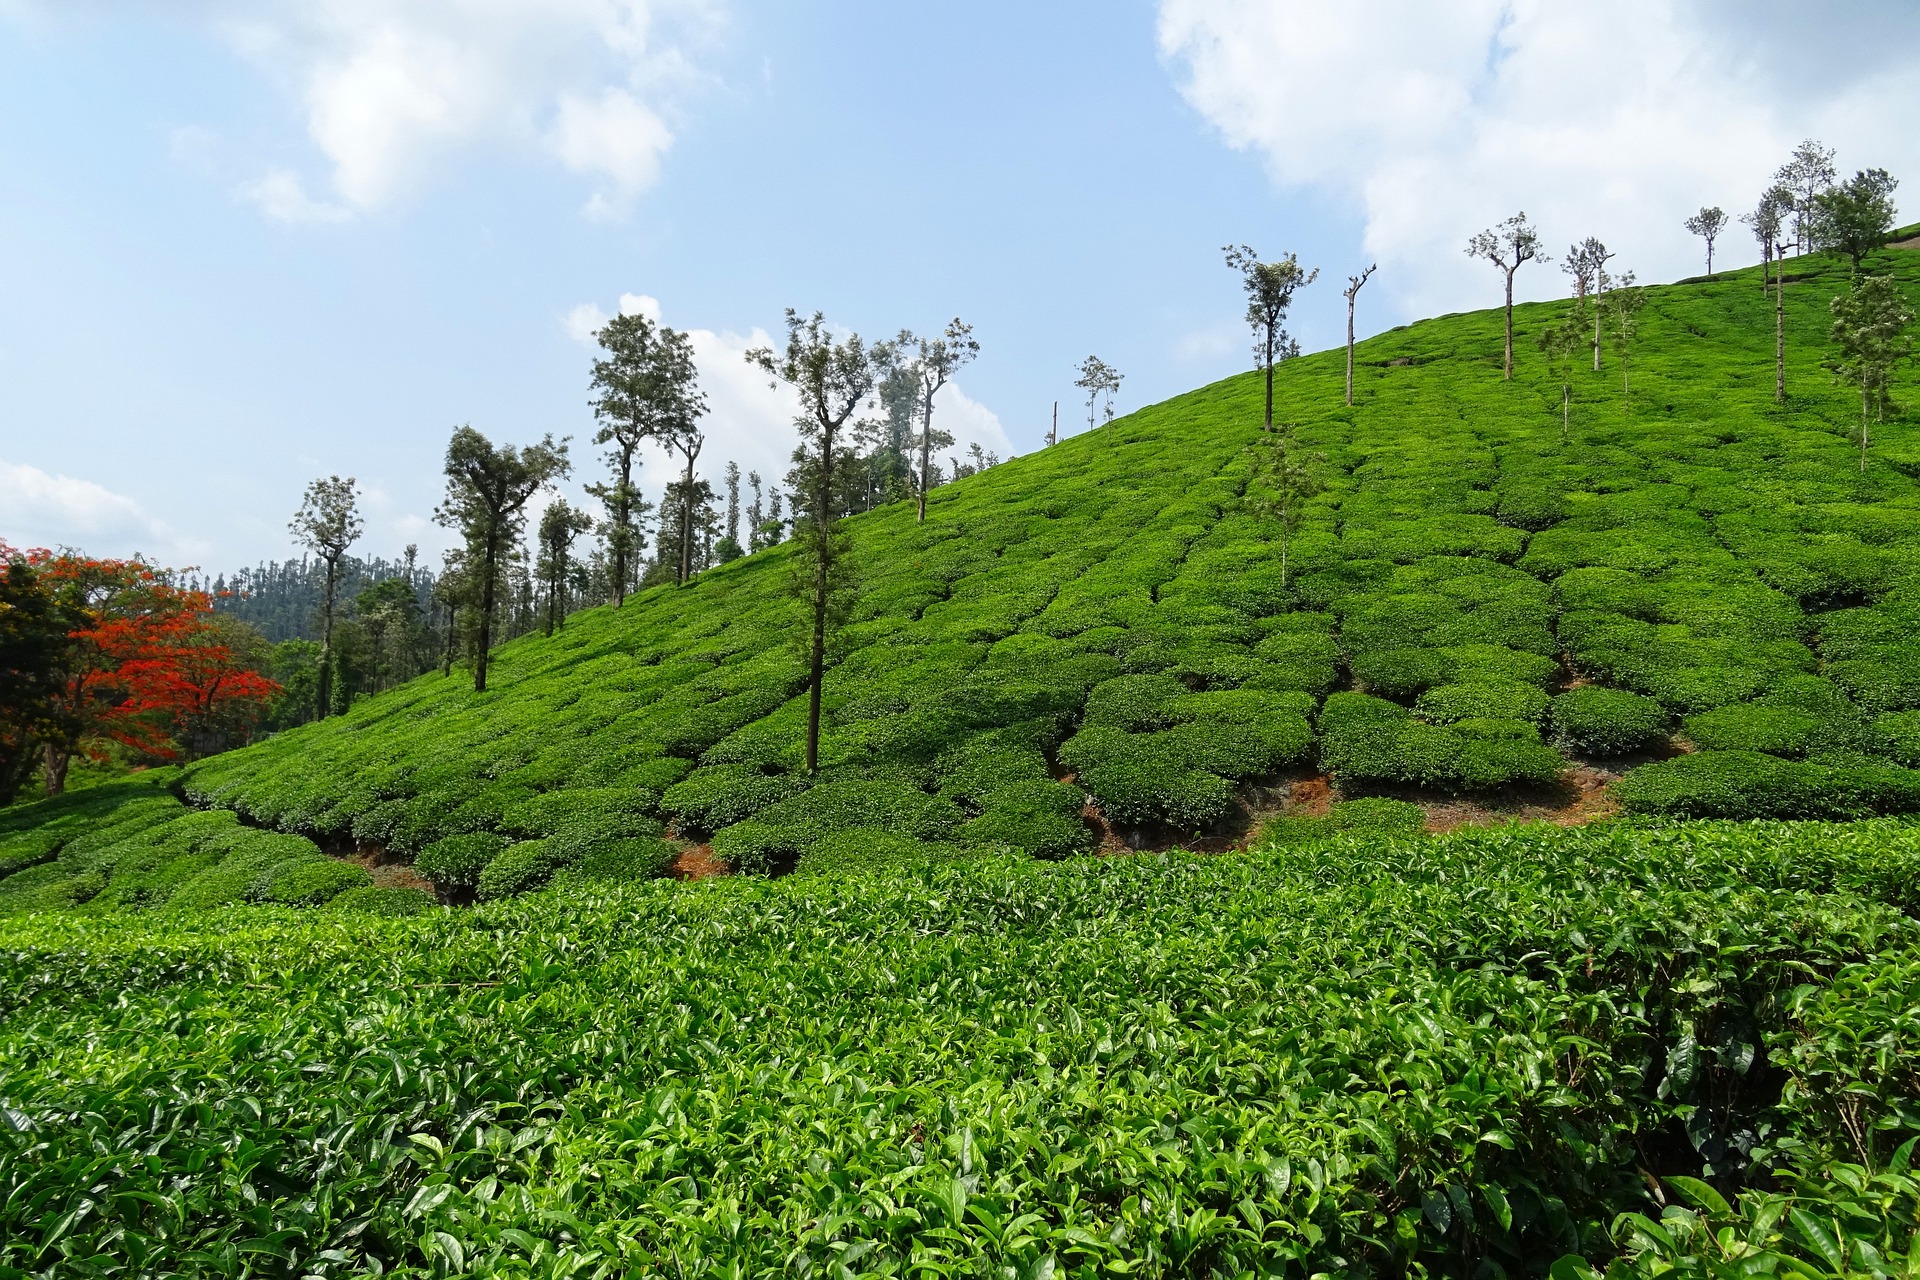 South India has many tourist destinations. If you want to visit South India in march, check out Chikmangaluru. It's greenary is breath taking. Here is coffee plantation of Chikmangaluru.